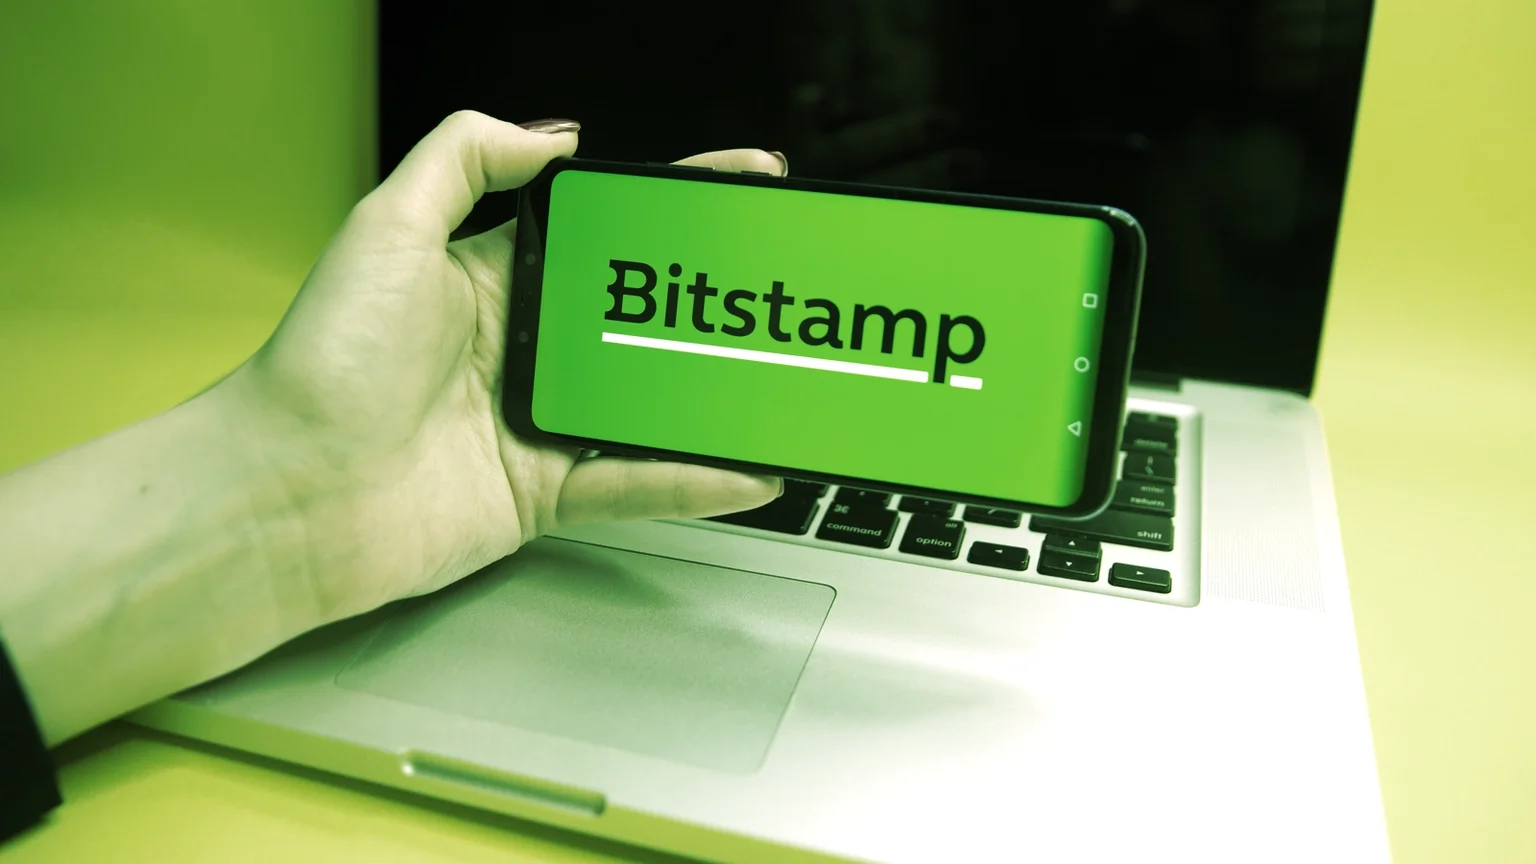 Bitstamp is a cryptocurrency exchange headquartered in the UK. Image: Shutterstock